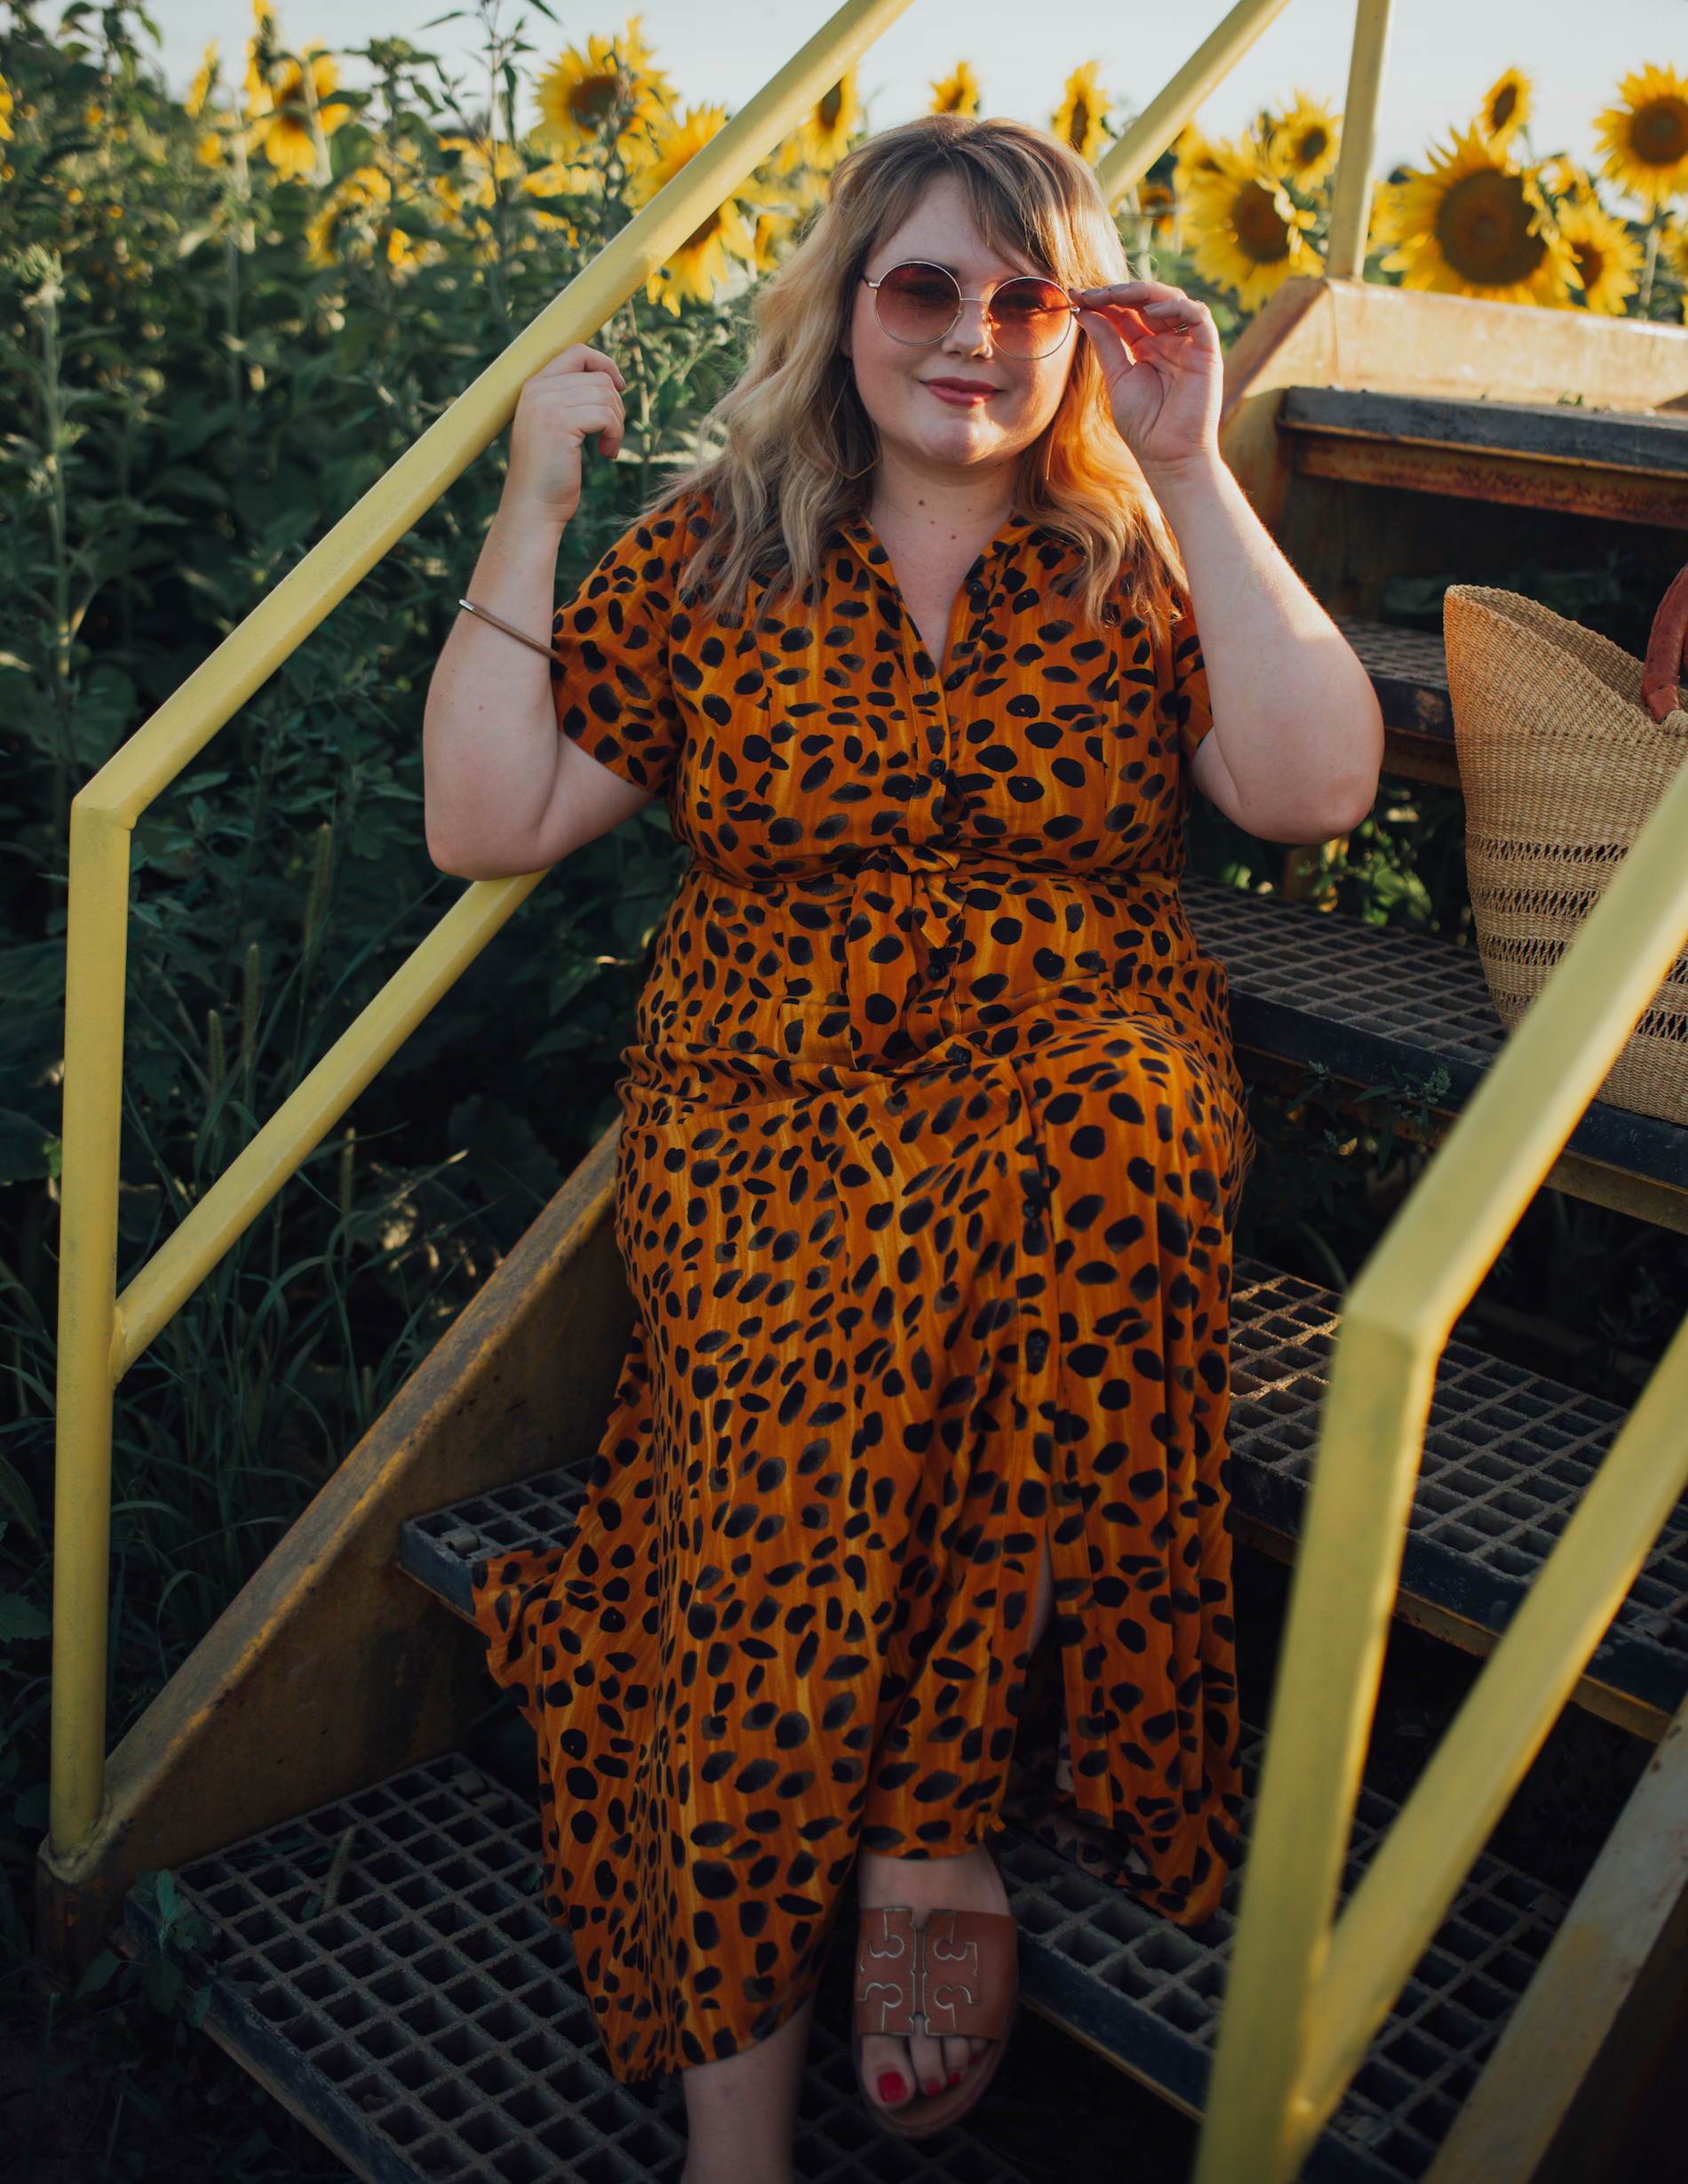 Anthropologie Plus Size . Sharing how I styled this Leopard Maxi Dress from Anrhropologie as an #Anthropartner